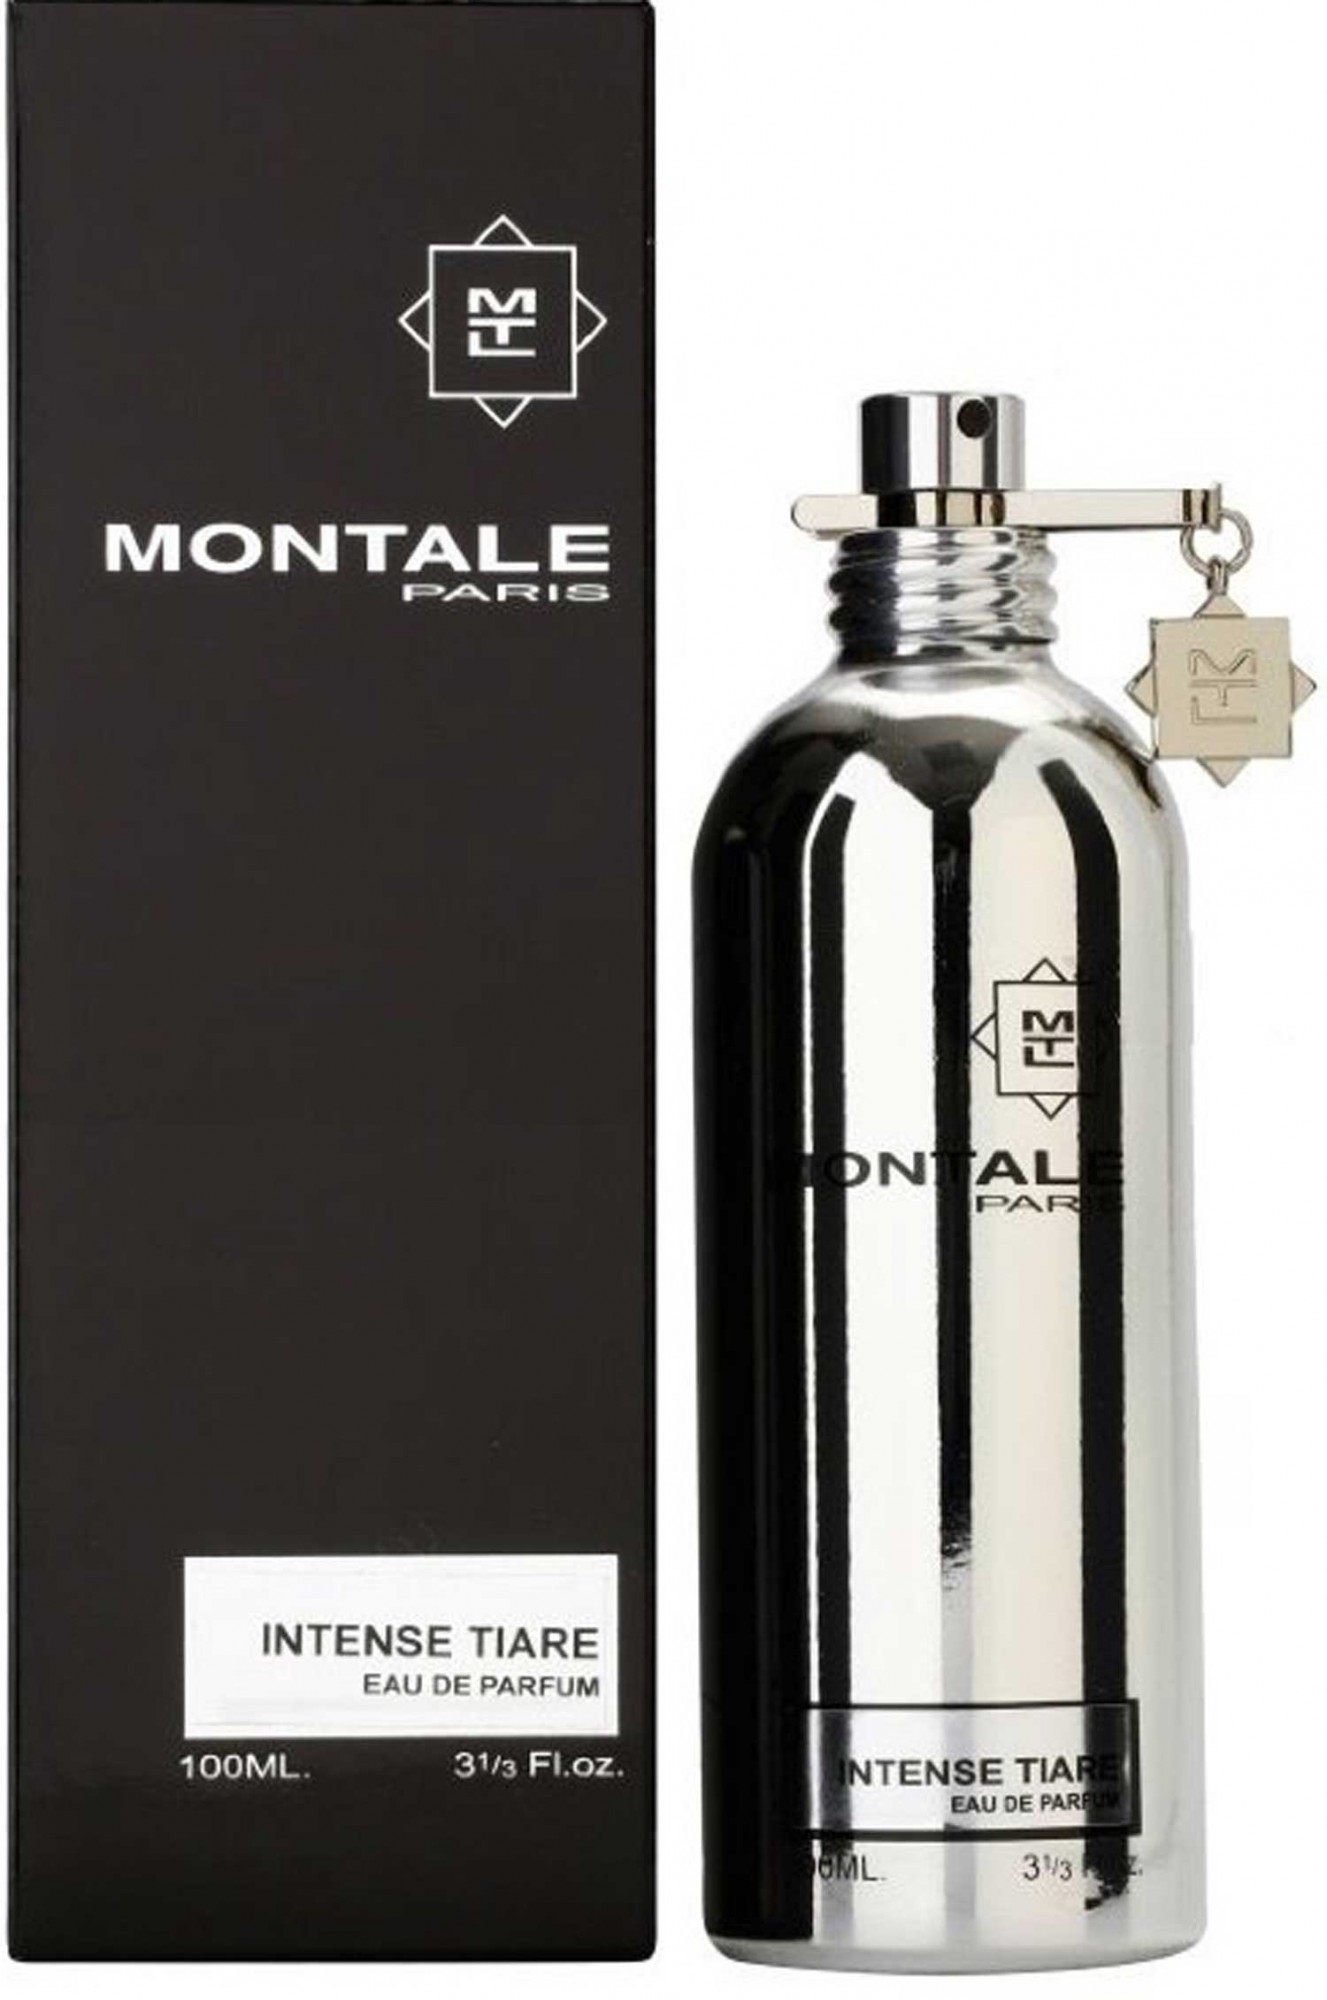 Montale Roses Musk 100ml. Montale patchouli